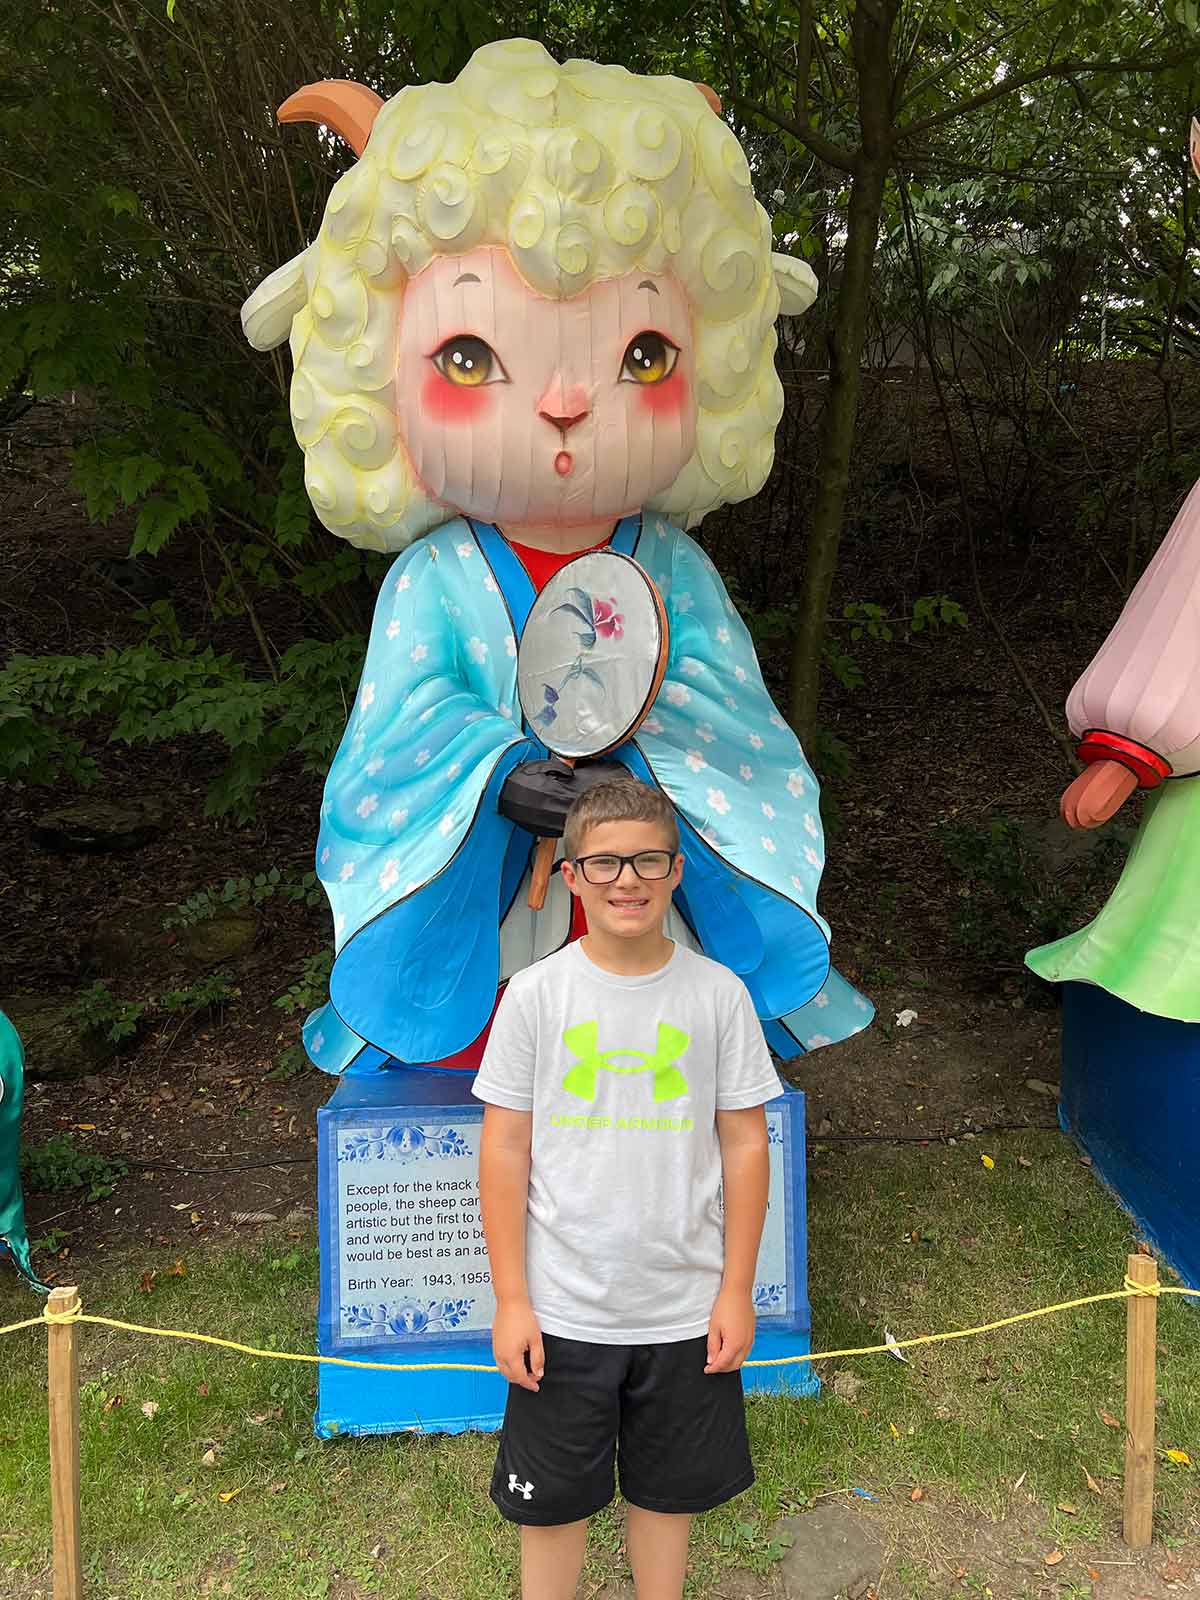 Boy standing in front of a large doll on display.